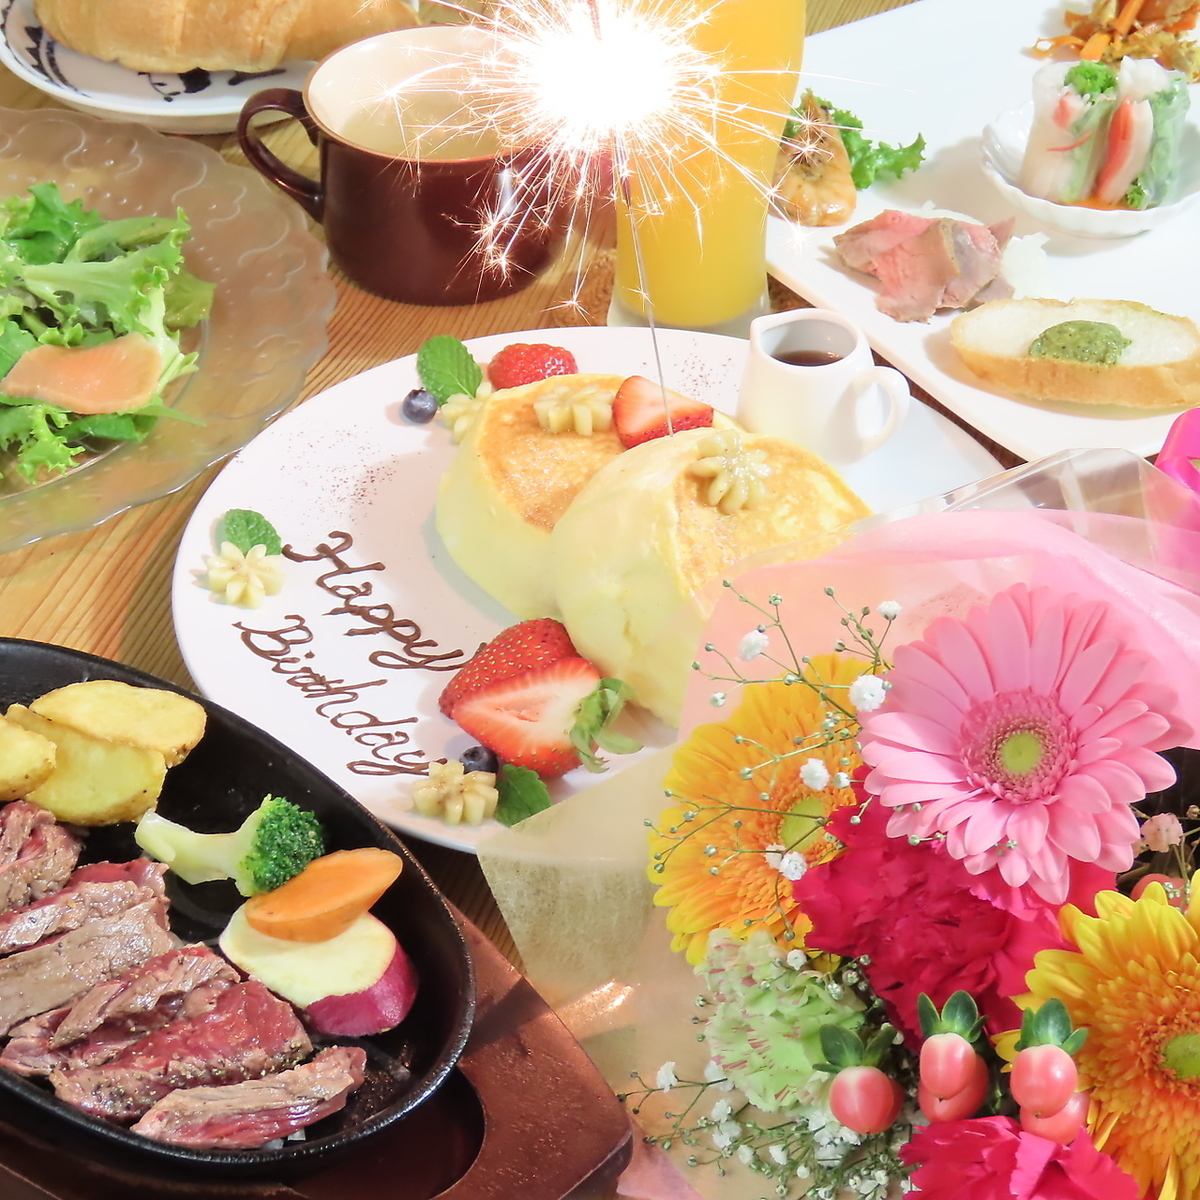 Not only can it be used for girls' parties and anniversaries, but it can also be used as an everyday cafe.